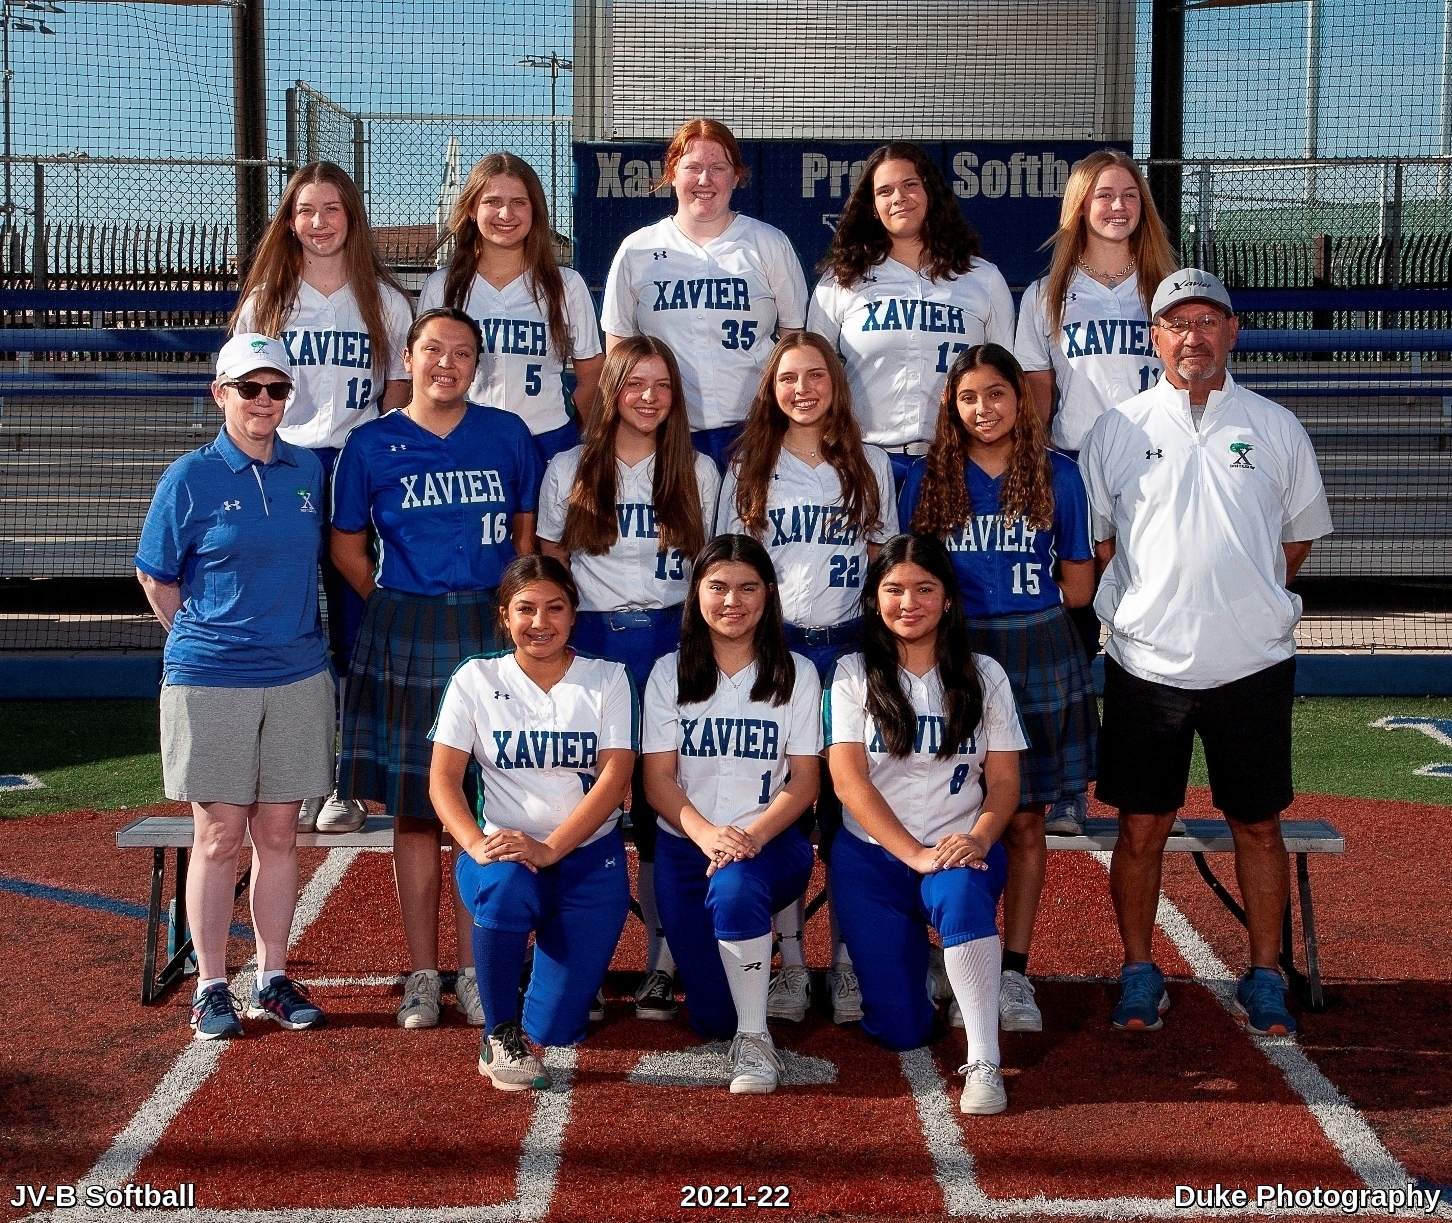 Softball - JV Team Pic 2021-22 for team page UPDATE